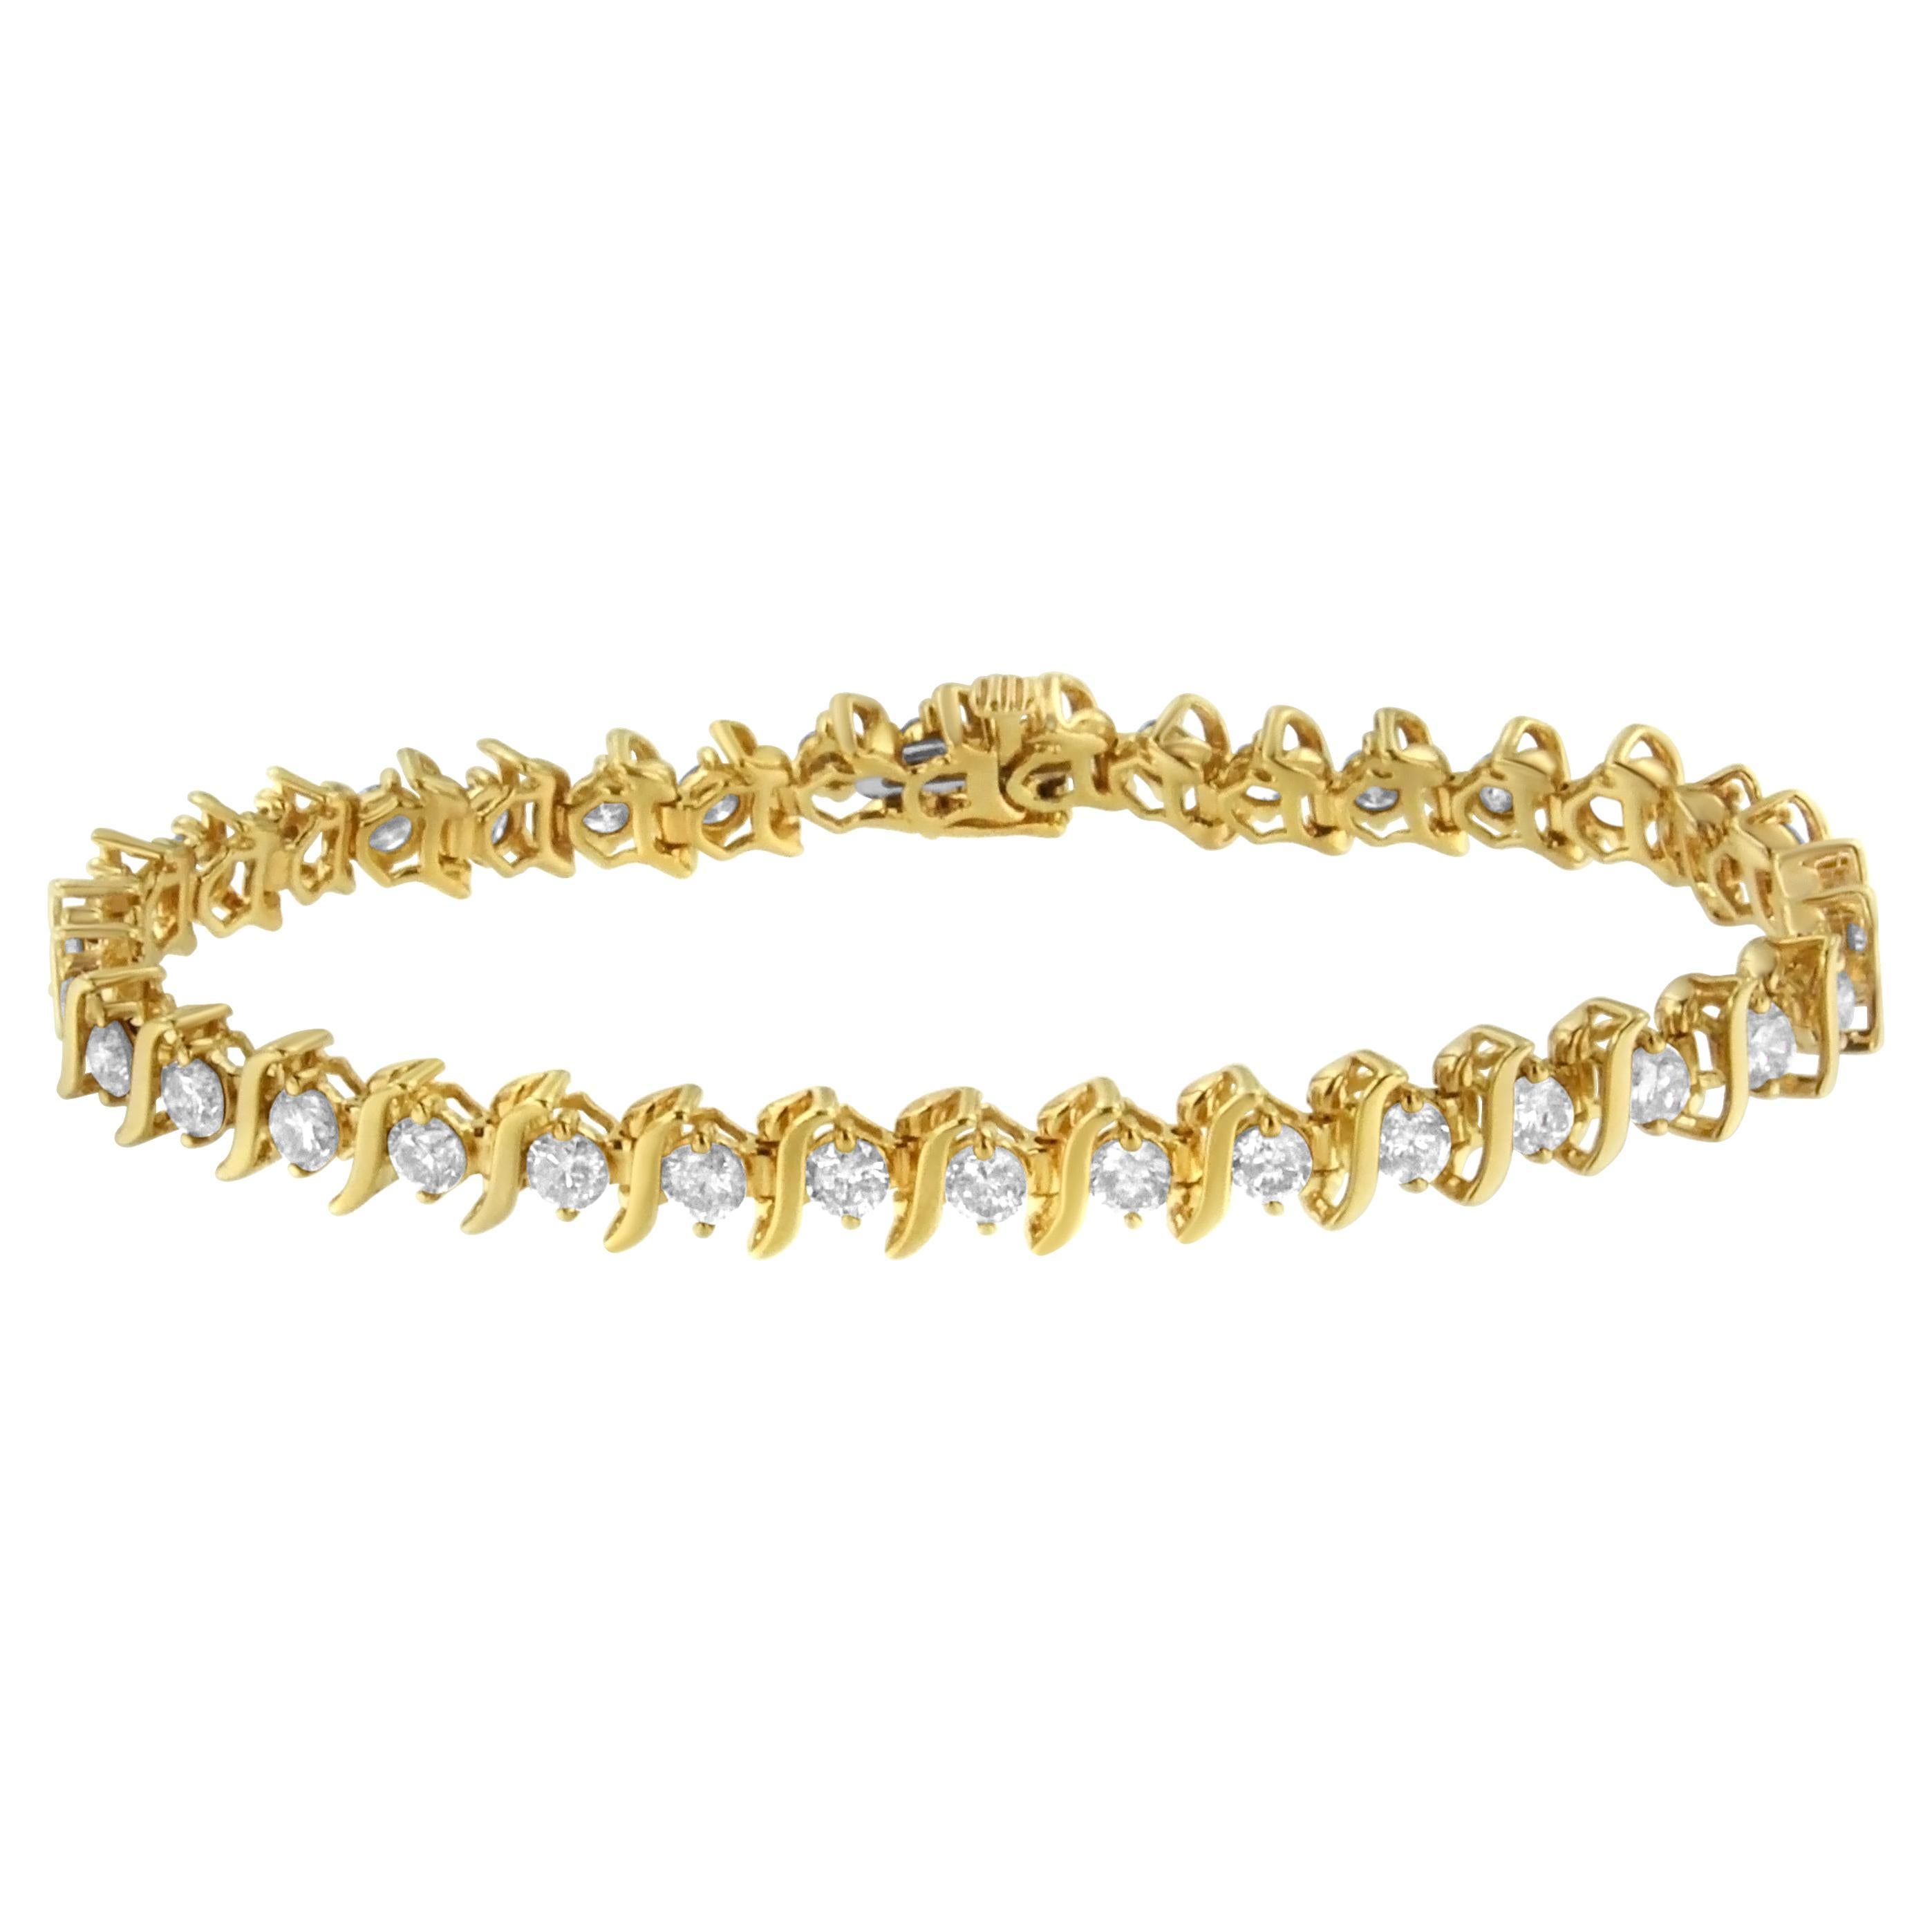 Yellow Gold Plated Sterling Silver 5.0 Carat Diamond Link Bracelet